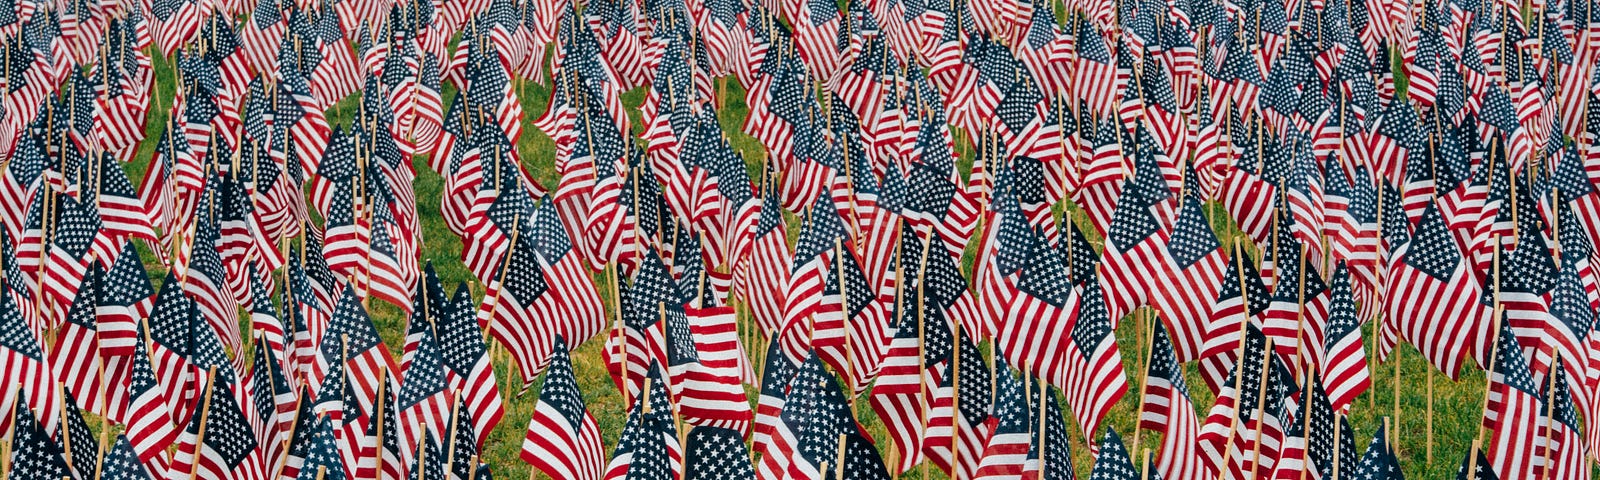 A sea of American flags on an open field of grass